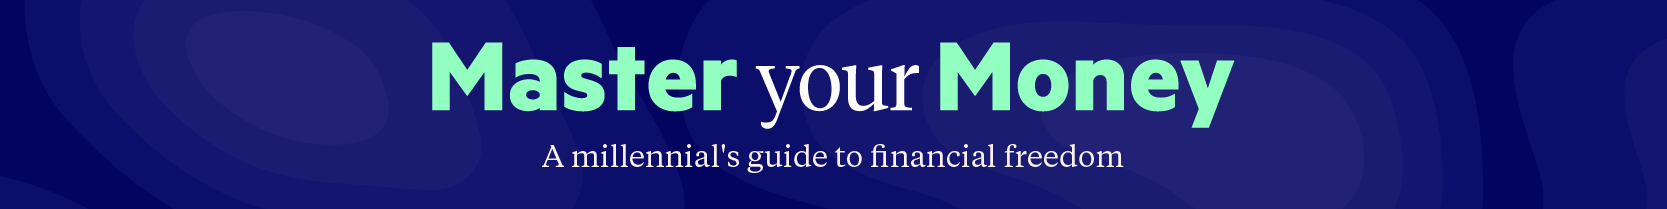 master your money banner no fidelity